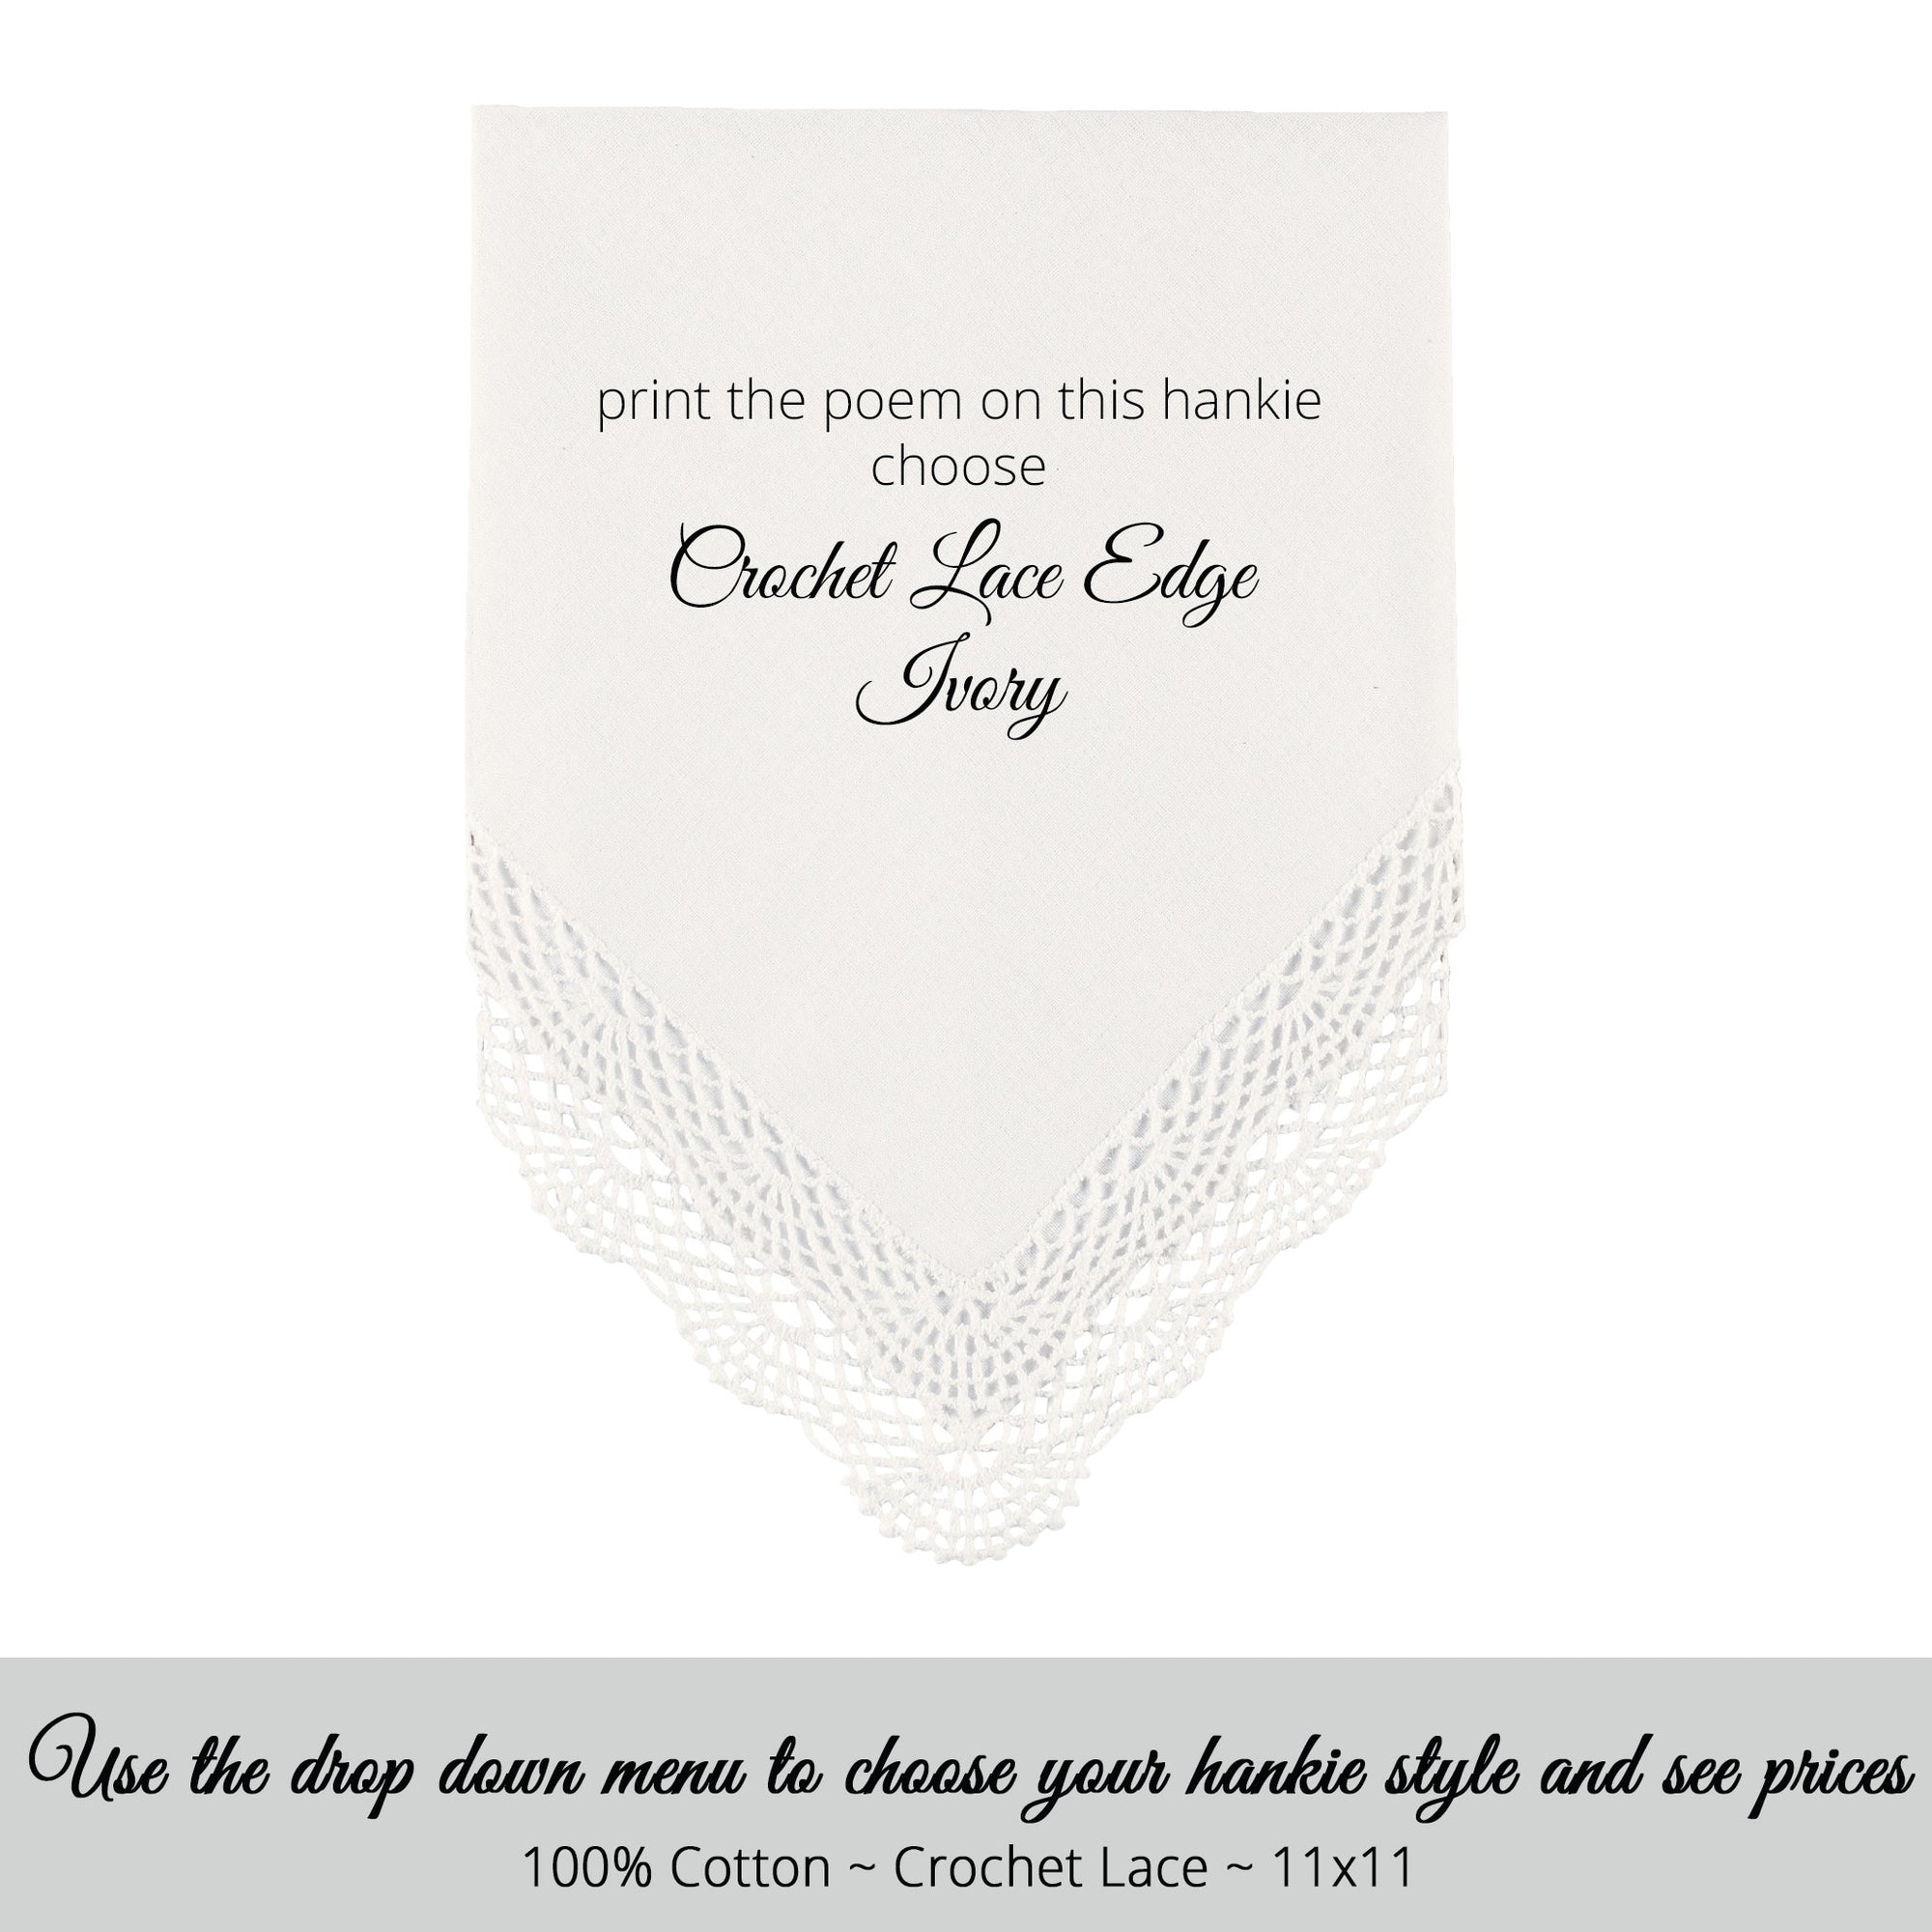 Wedding handkerchief ivory with crochet lace edge for the sister of the bride maid of honor poem printed hankie